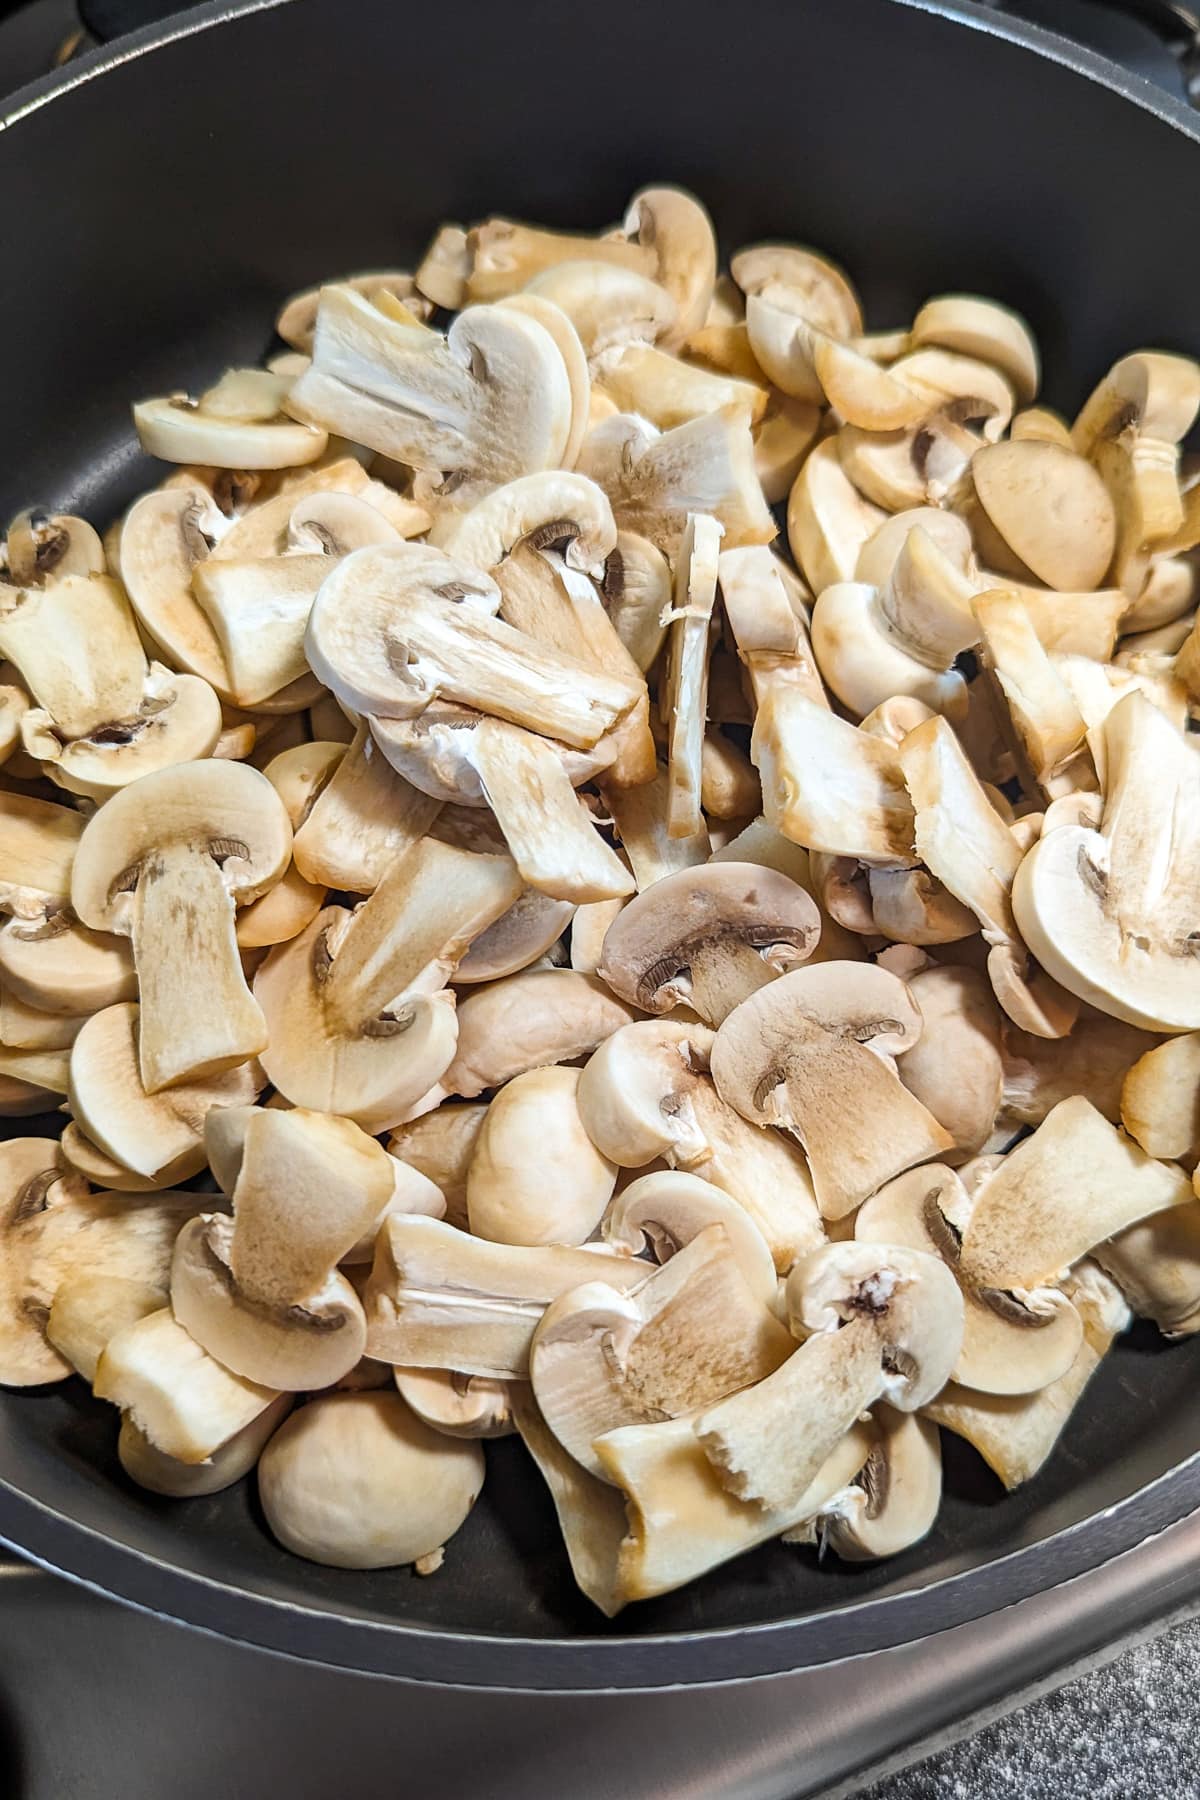 Pan with mushrooms halves on the stove.